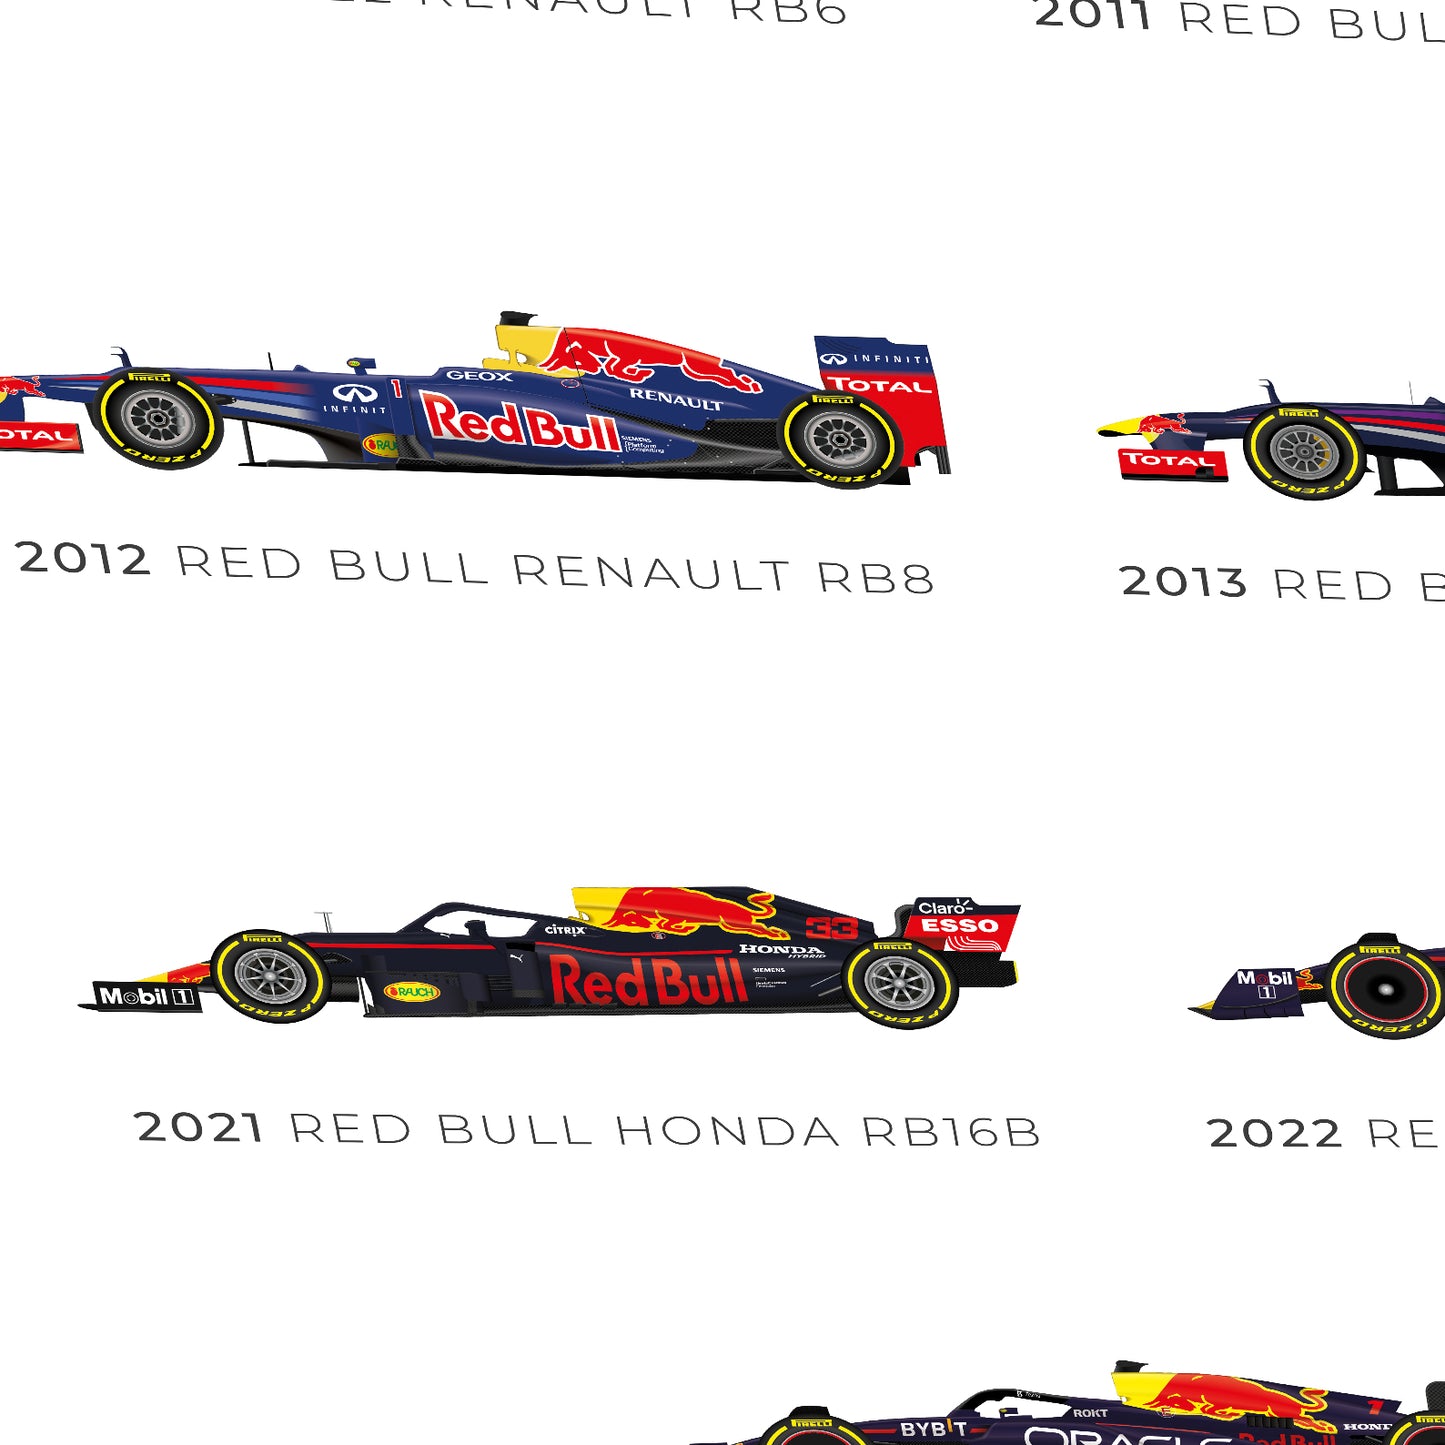 a red bull racing car is shown in four different positions